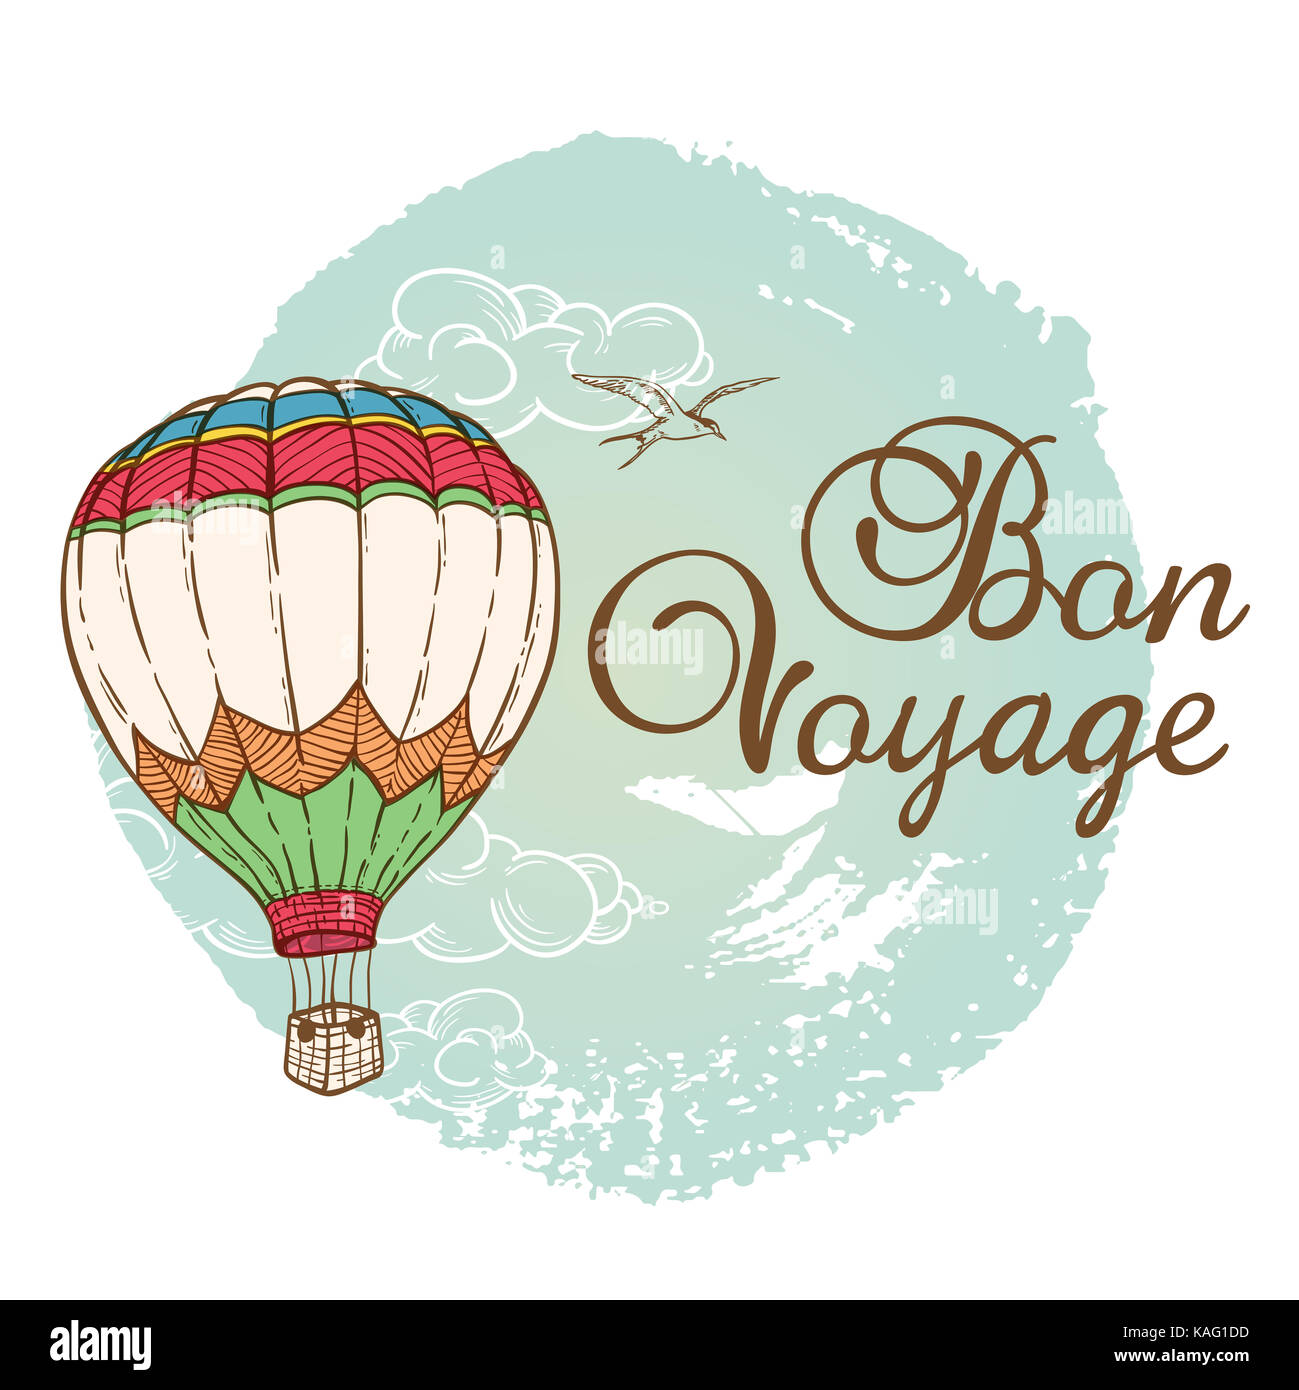 Travel background with air balloon and cloud. Hand drawn illustration. Stock Photo